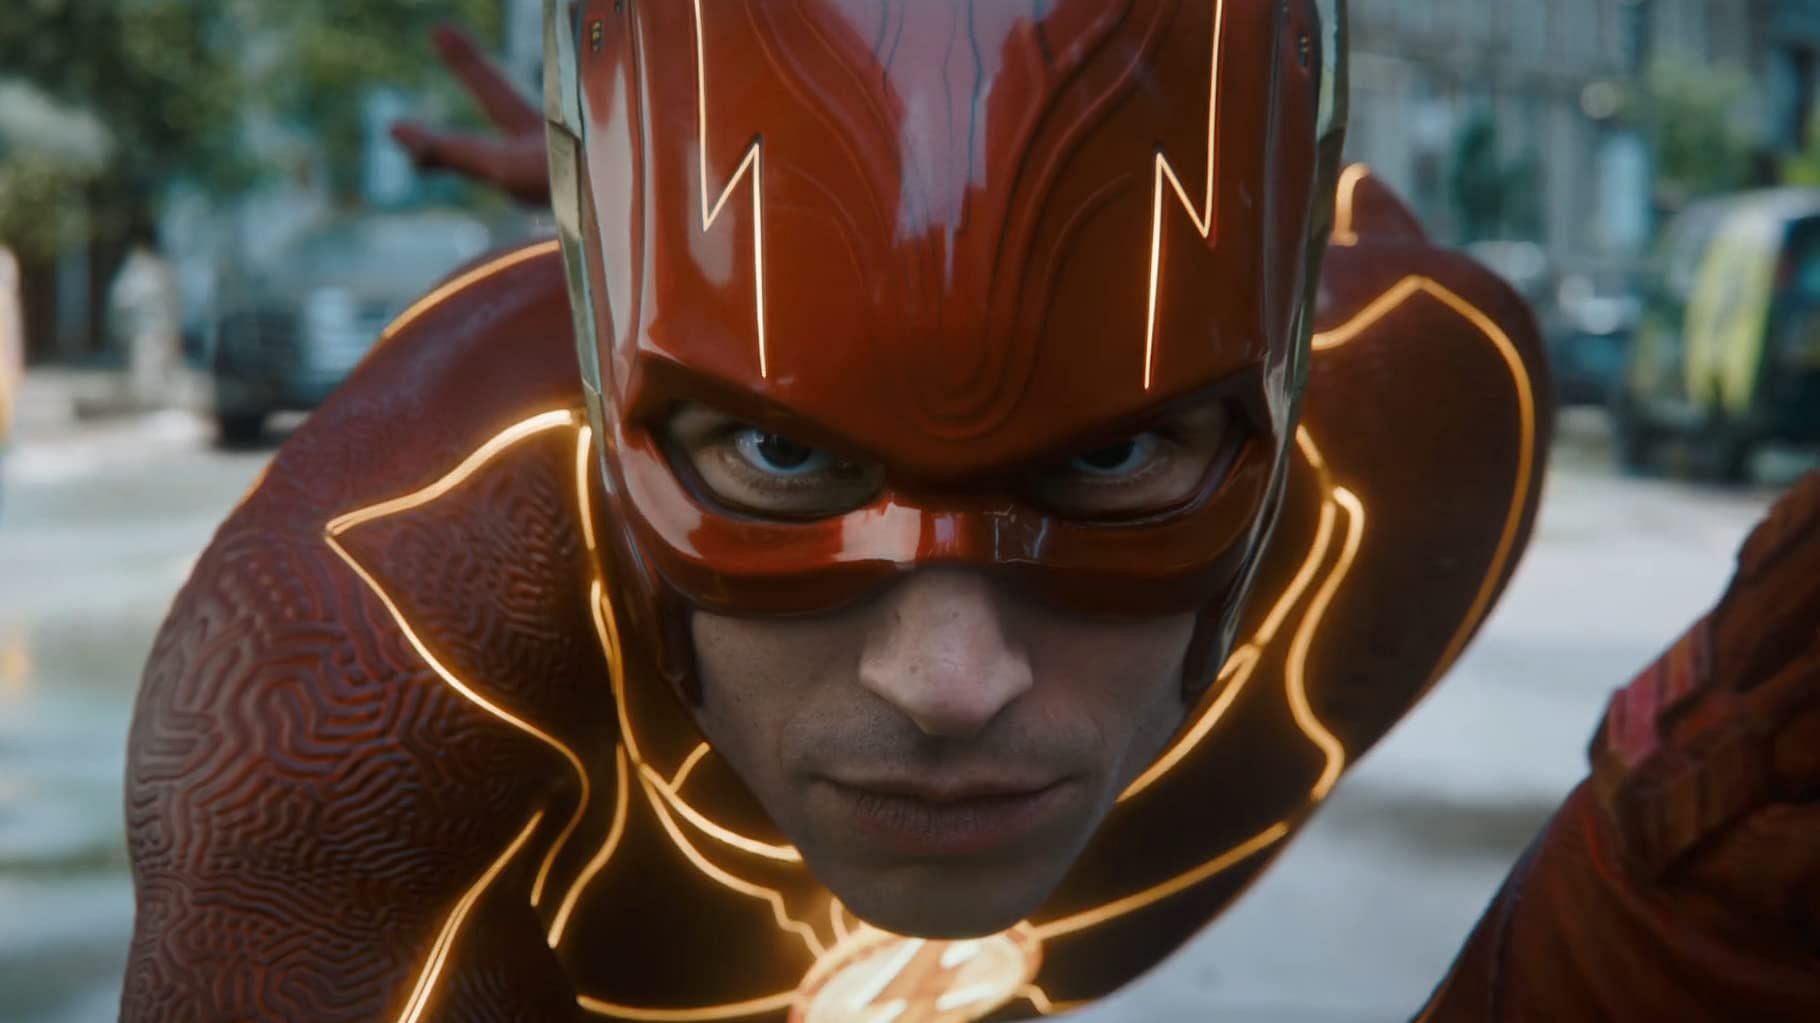 Critics are raving about The Flash as one of the best superhero films ever made, with standout performances from Ezra Miller and Michael Keaton (Image via Warner Bros)